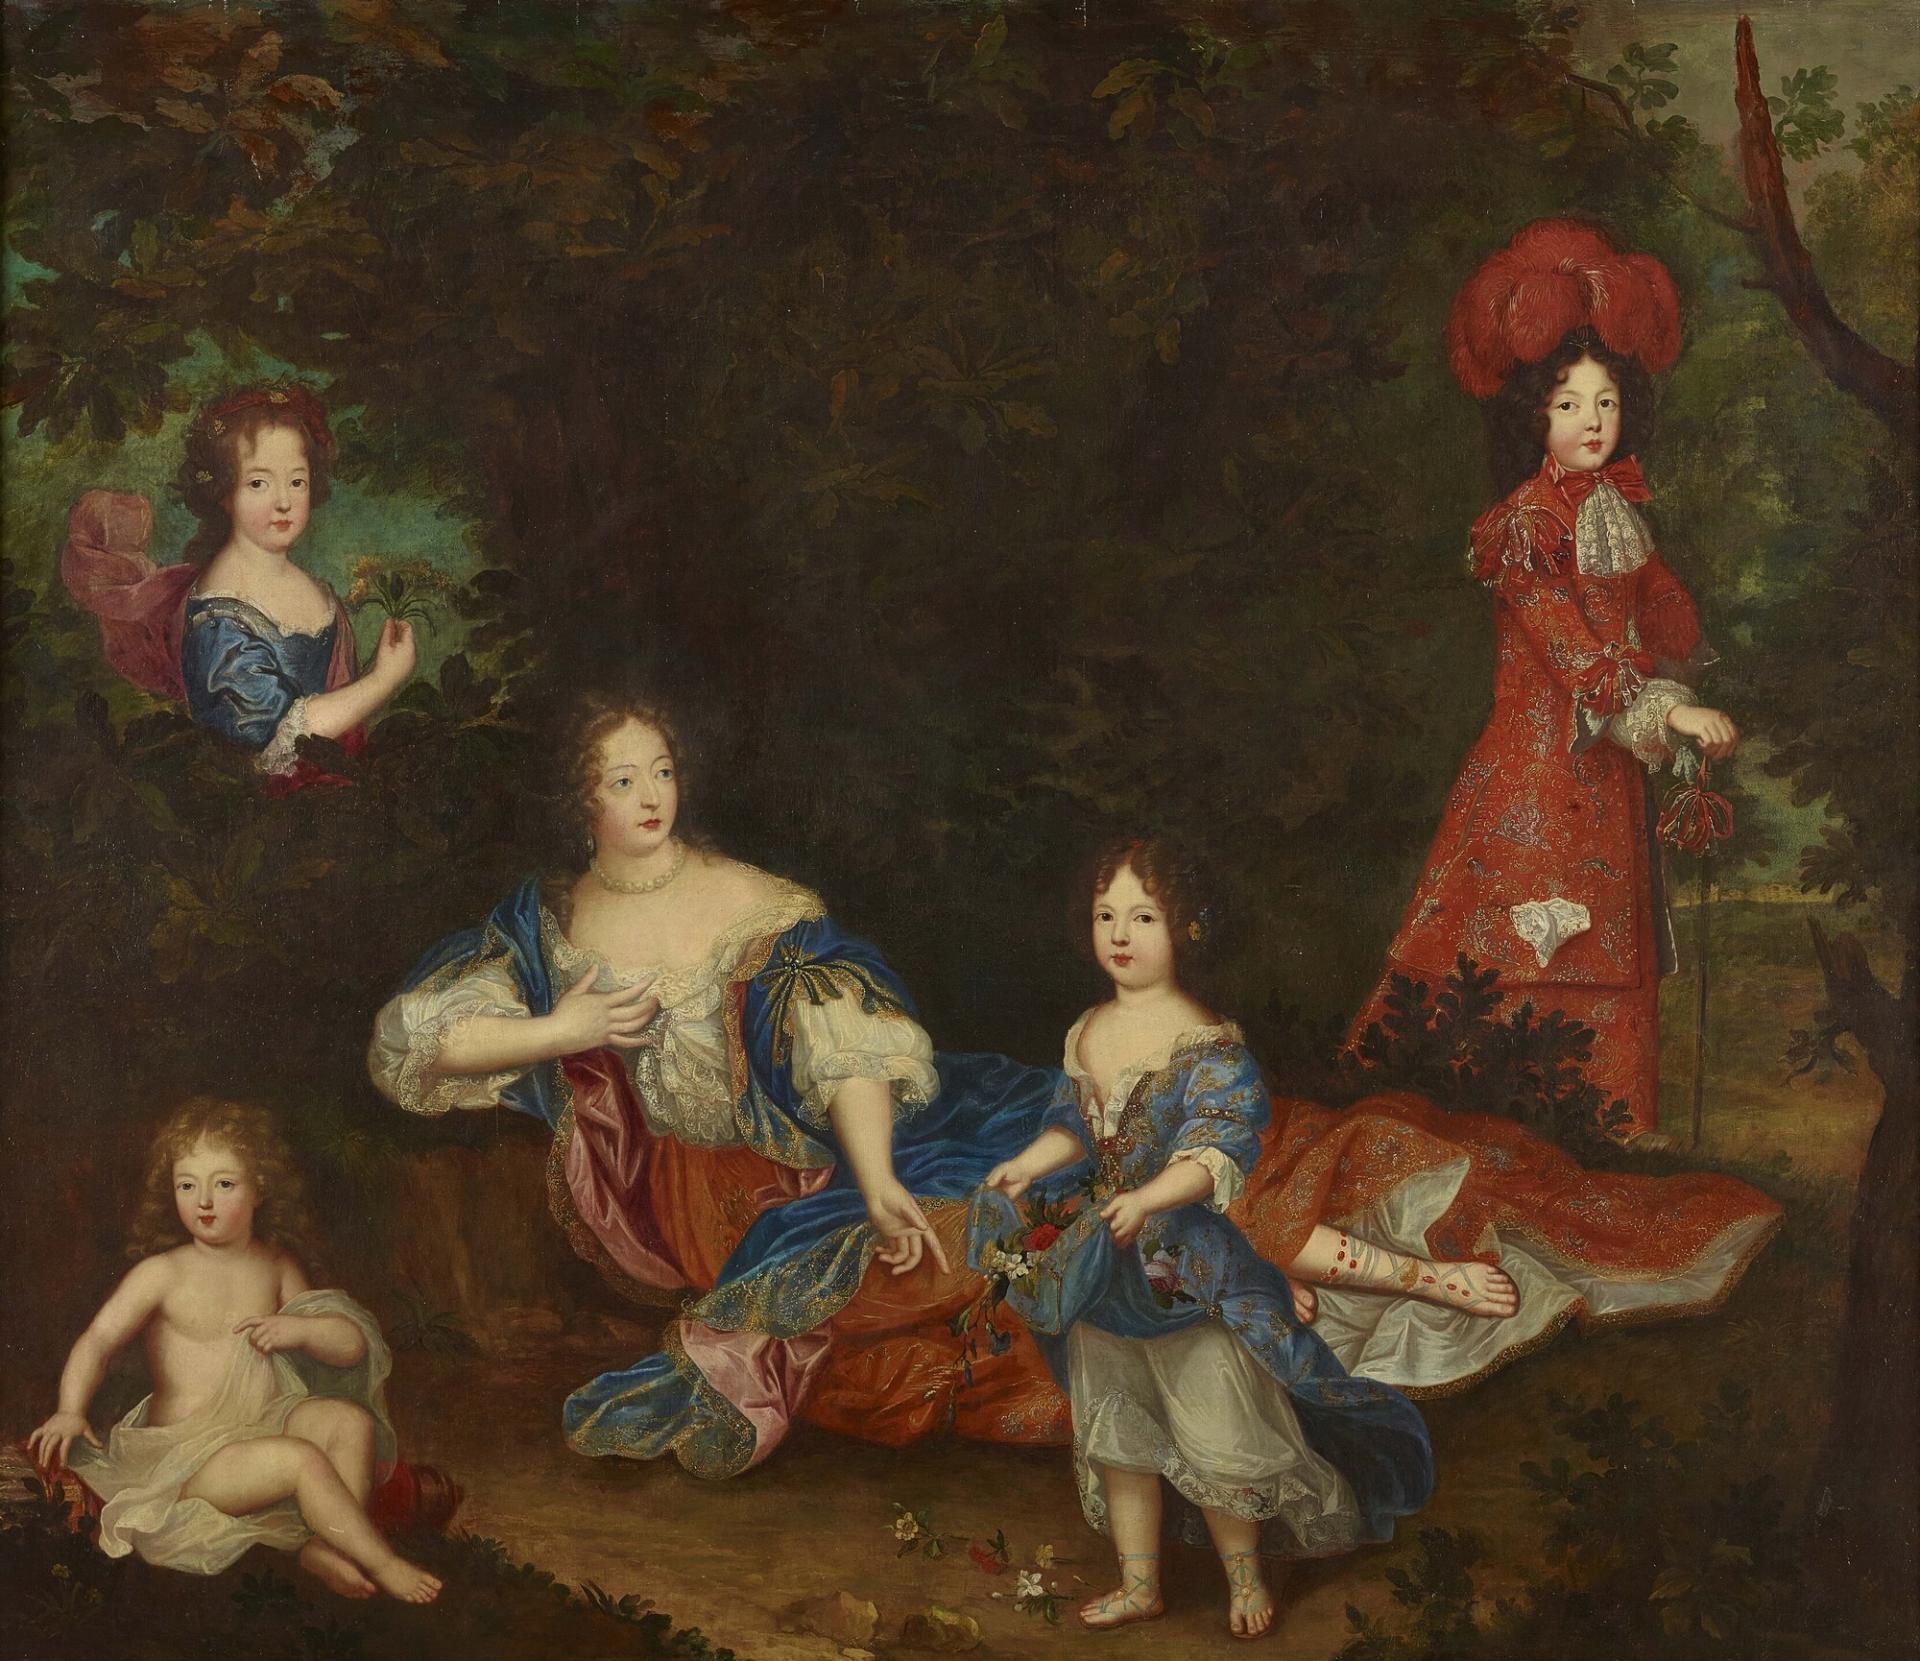 Louis XIV and his women